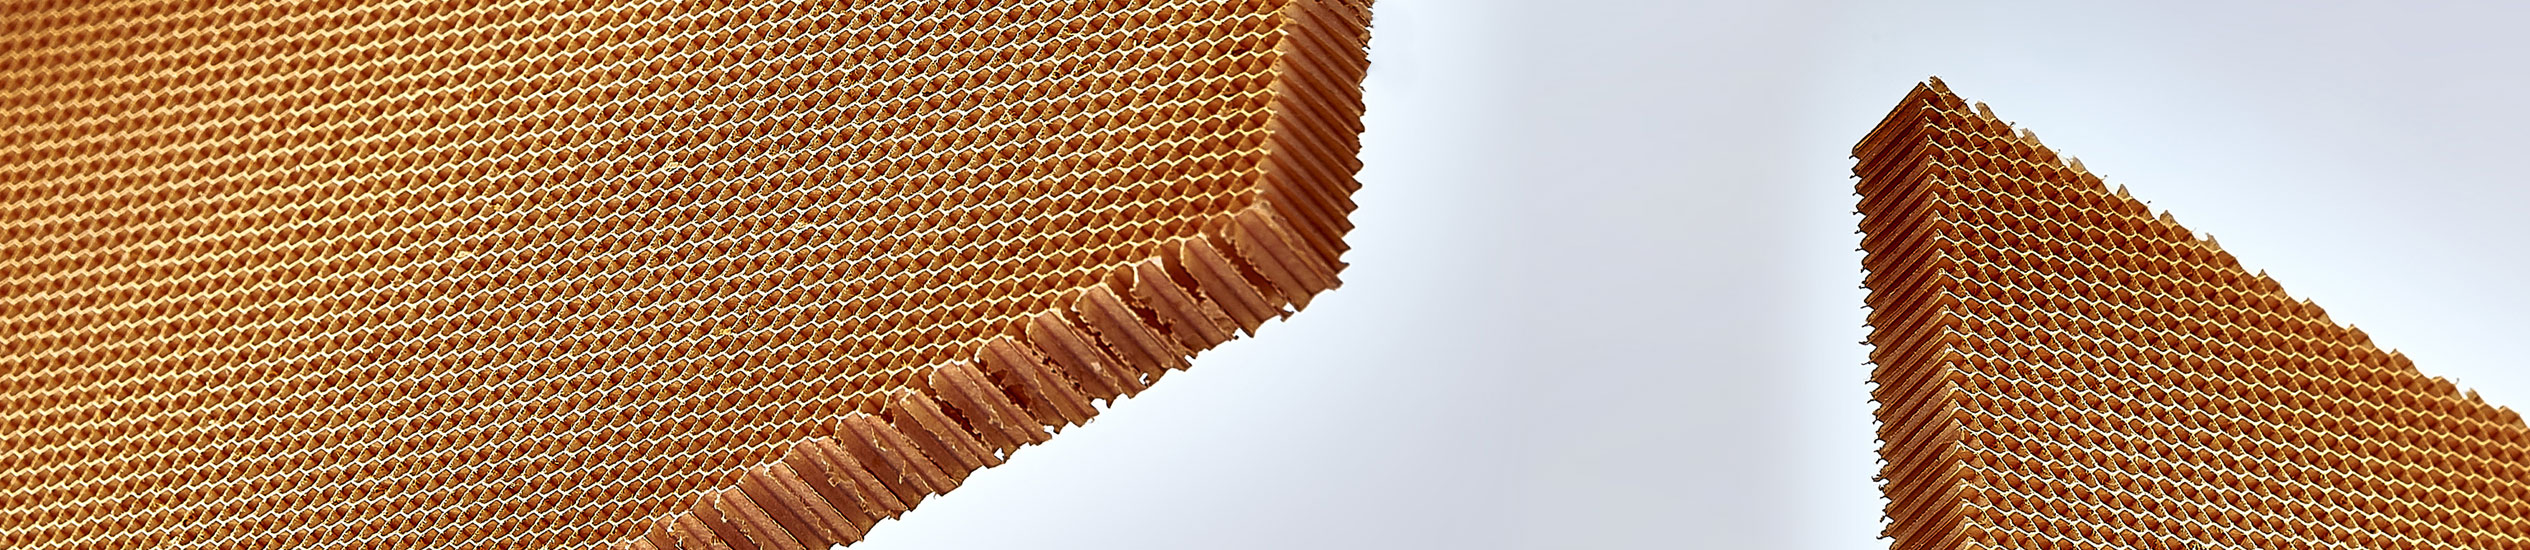 Nomex® honeycomb is an extremely lightweight,high strength,non metallic product manufactured with aramid fiber paper impregnated with a heat resistant phenolic